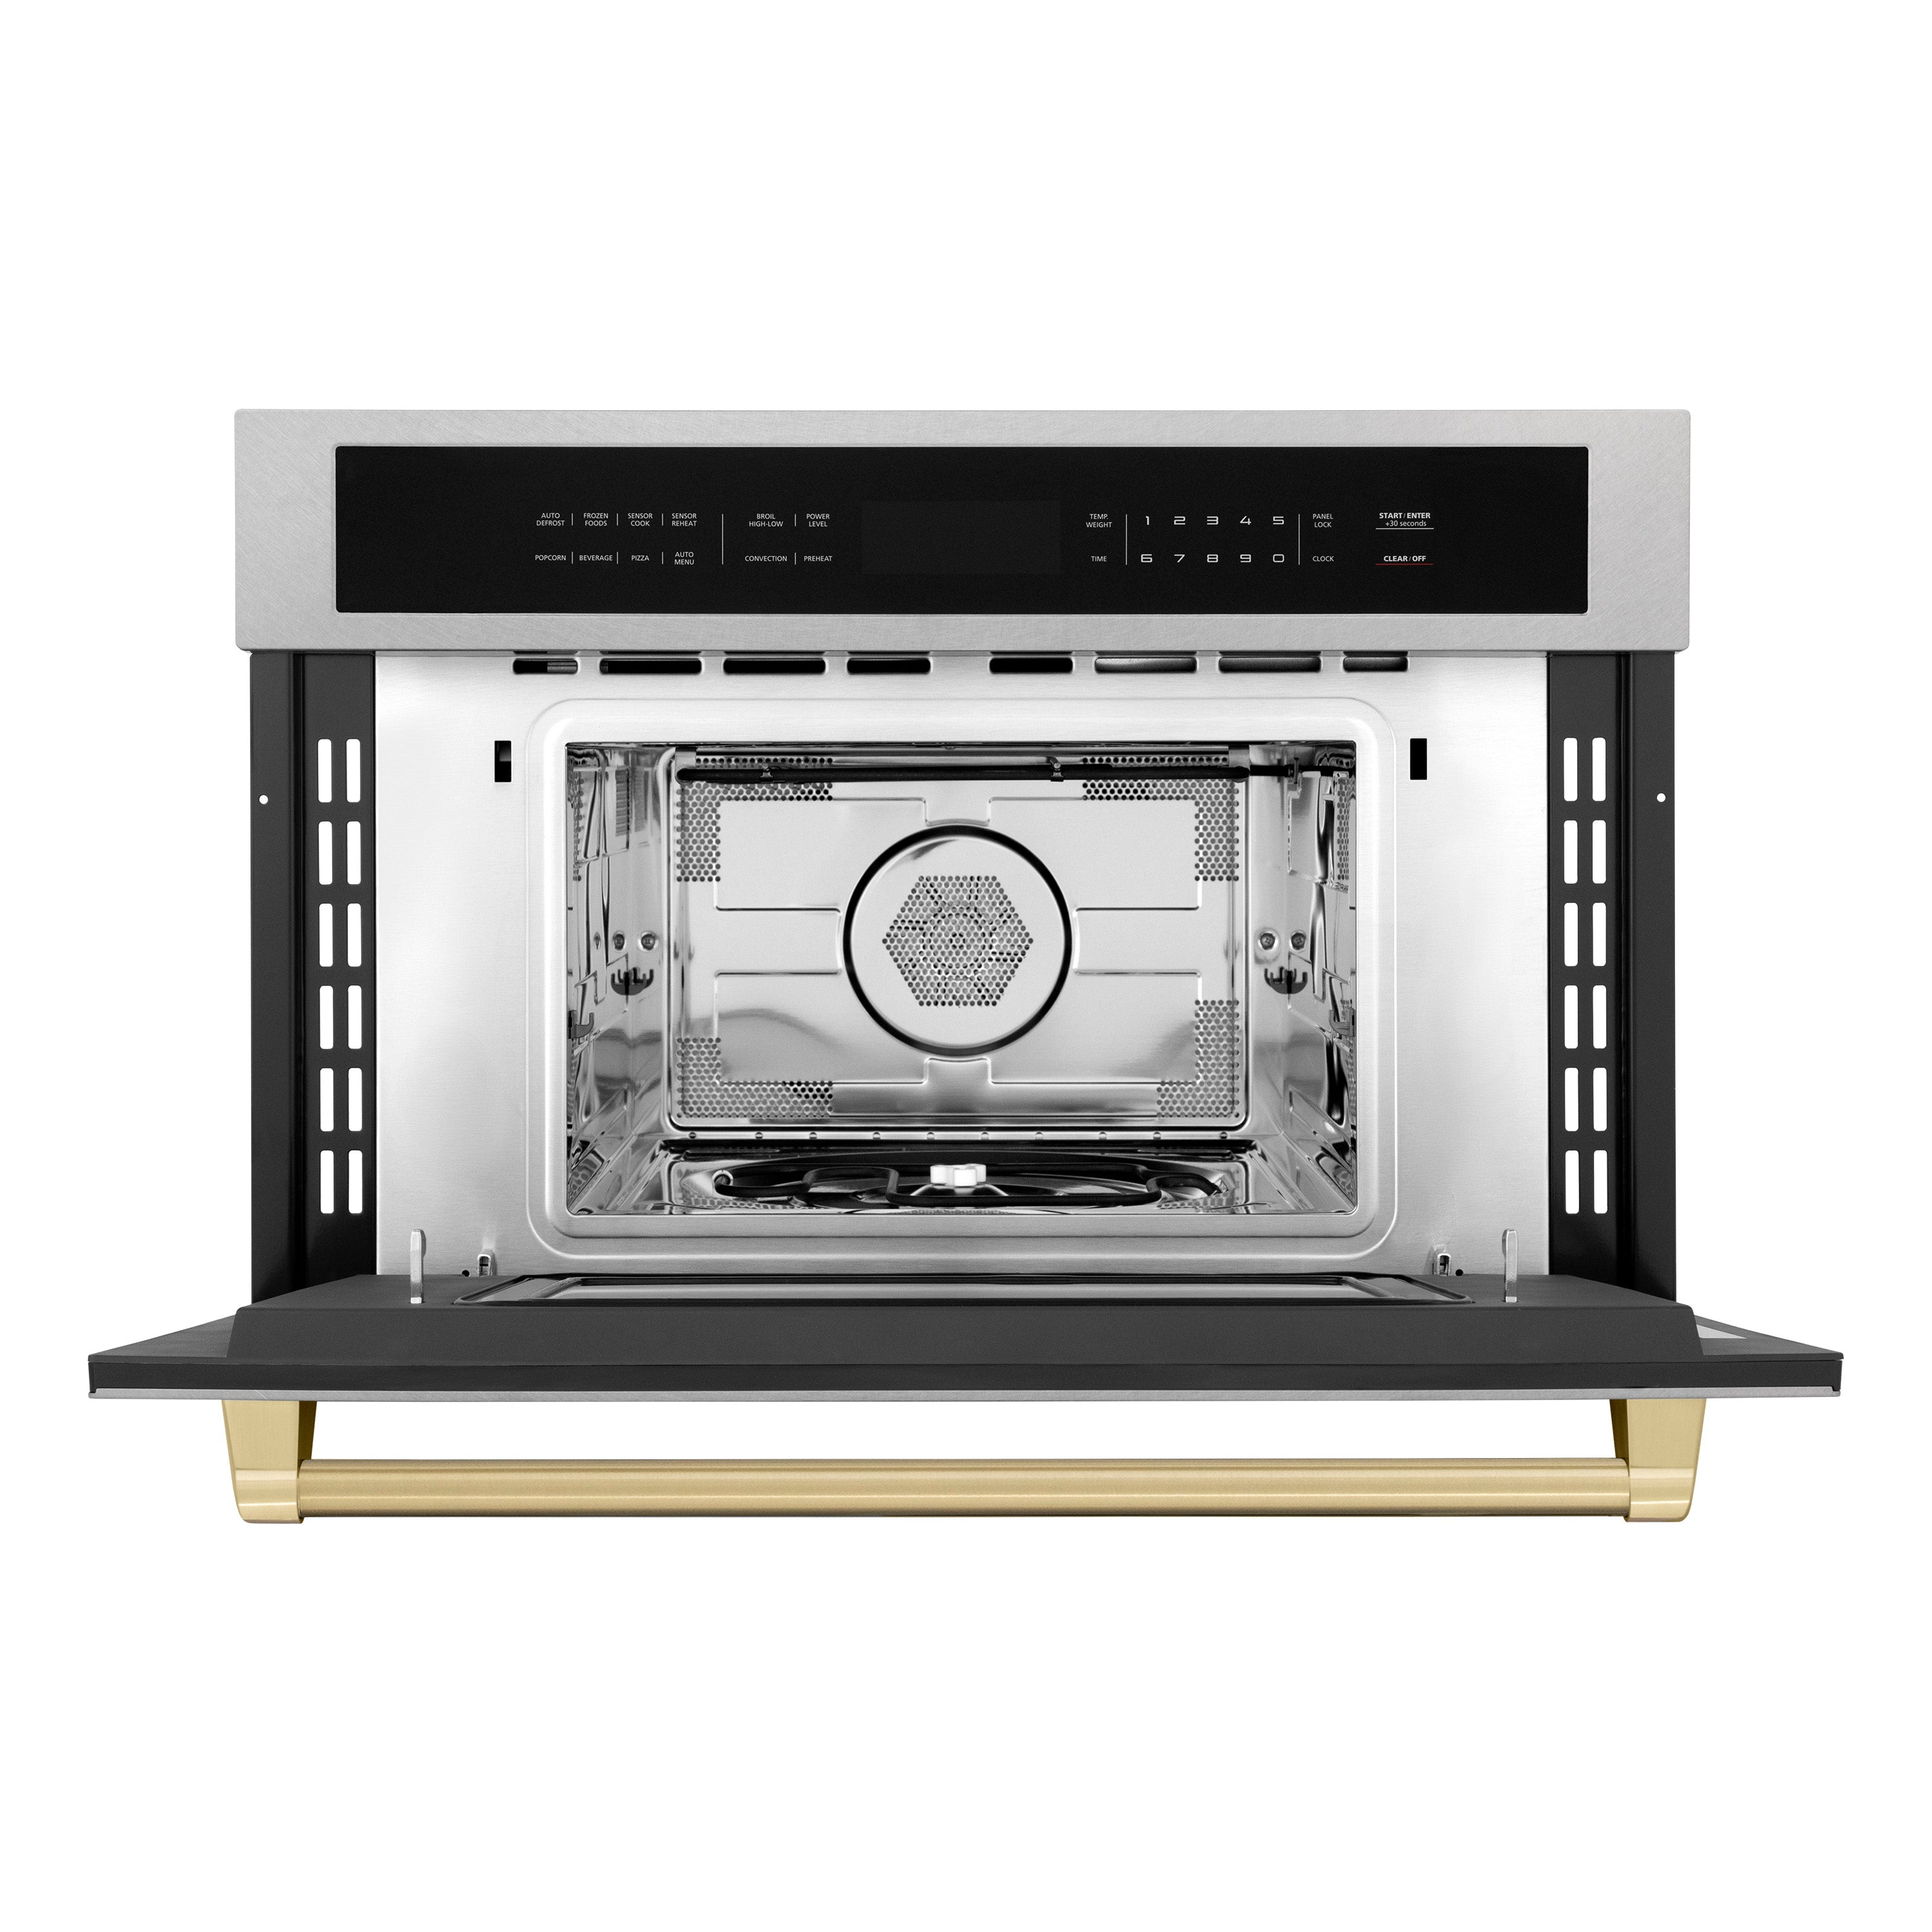 ZLINE Autograph Edition 30 in. 1.6 cu ft. Built-in Convection Microwave Oven in Fingerprint Resistant Stainless Steel with Champagne Bronze Accents (MWOZ-30-SS-CB) Front View Door Open